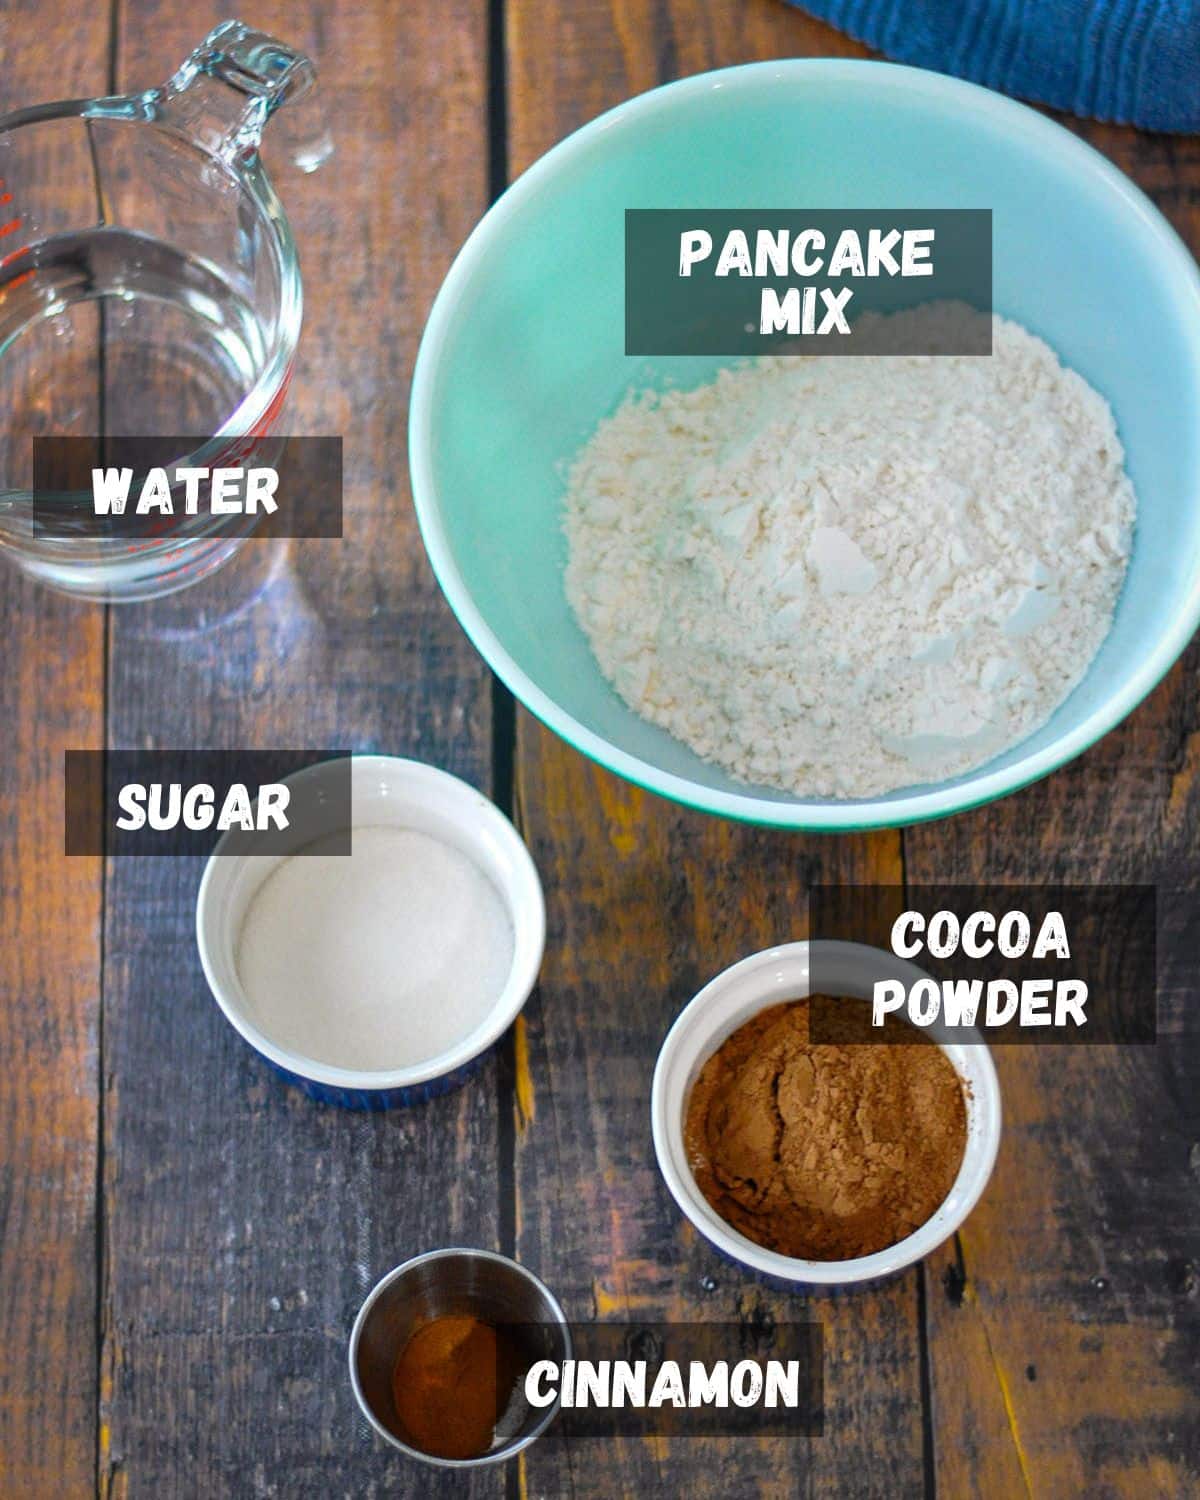 Ingredients shown for chocolate pancakes.